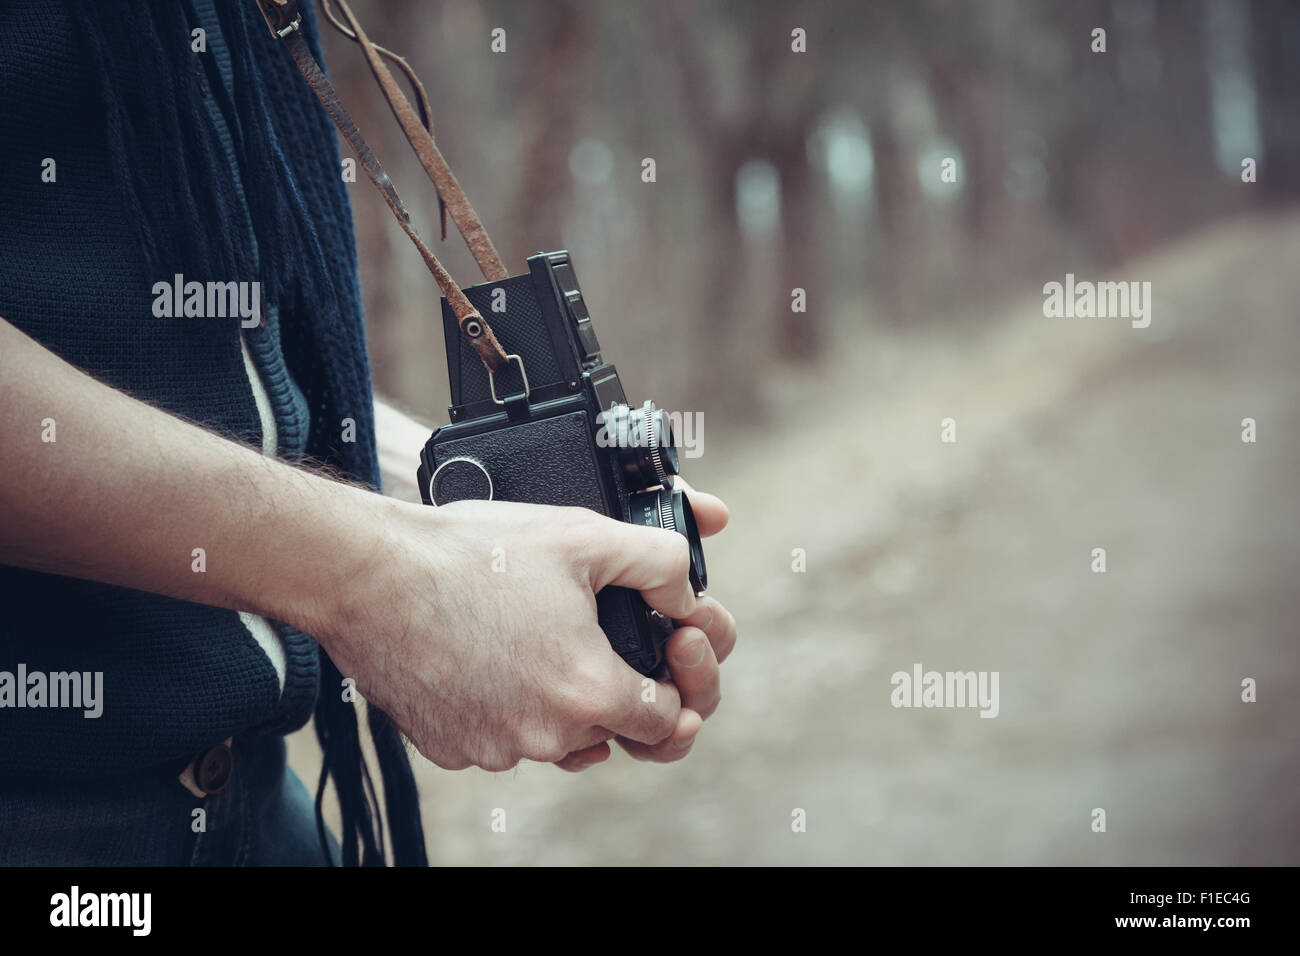 Vintage stylized photo of hands of young man photographer with old camera. Stock Photo